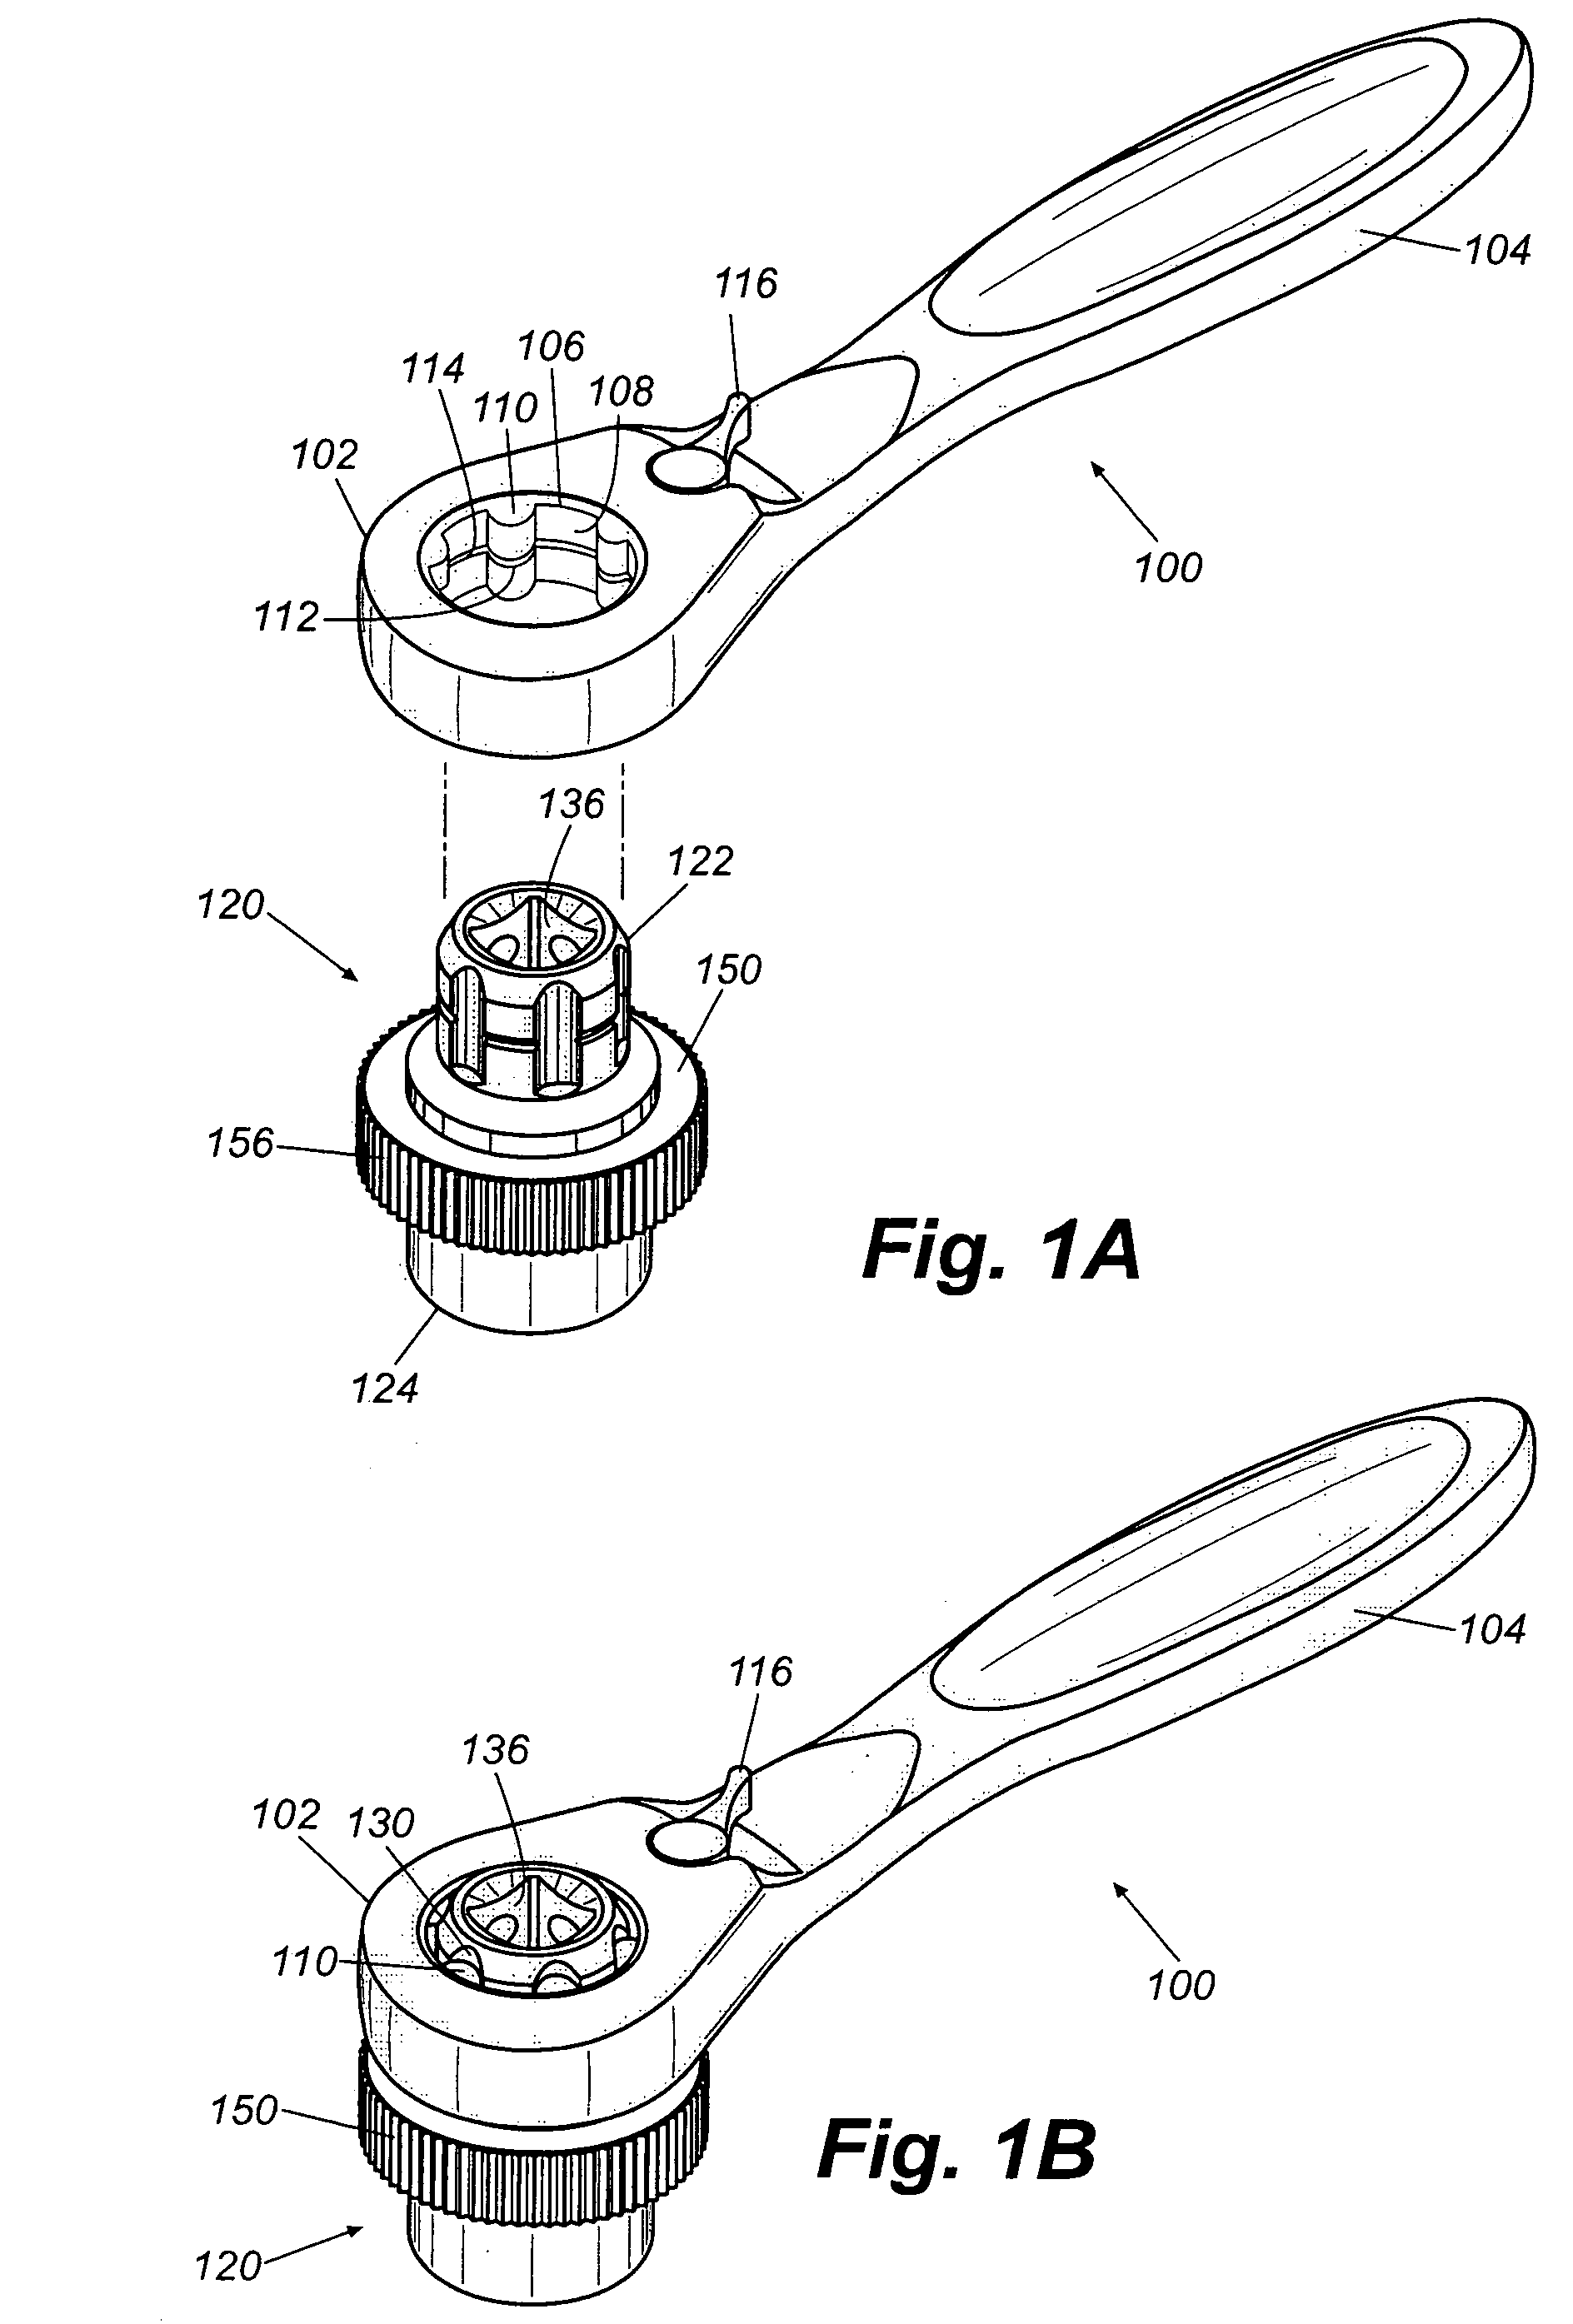 Oil drain plug socket for a wrench assembly